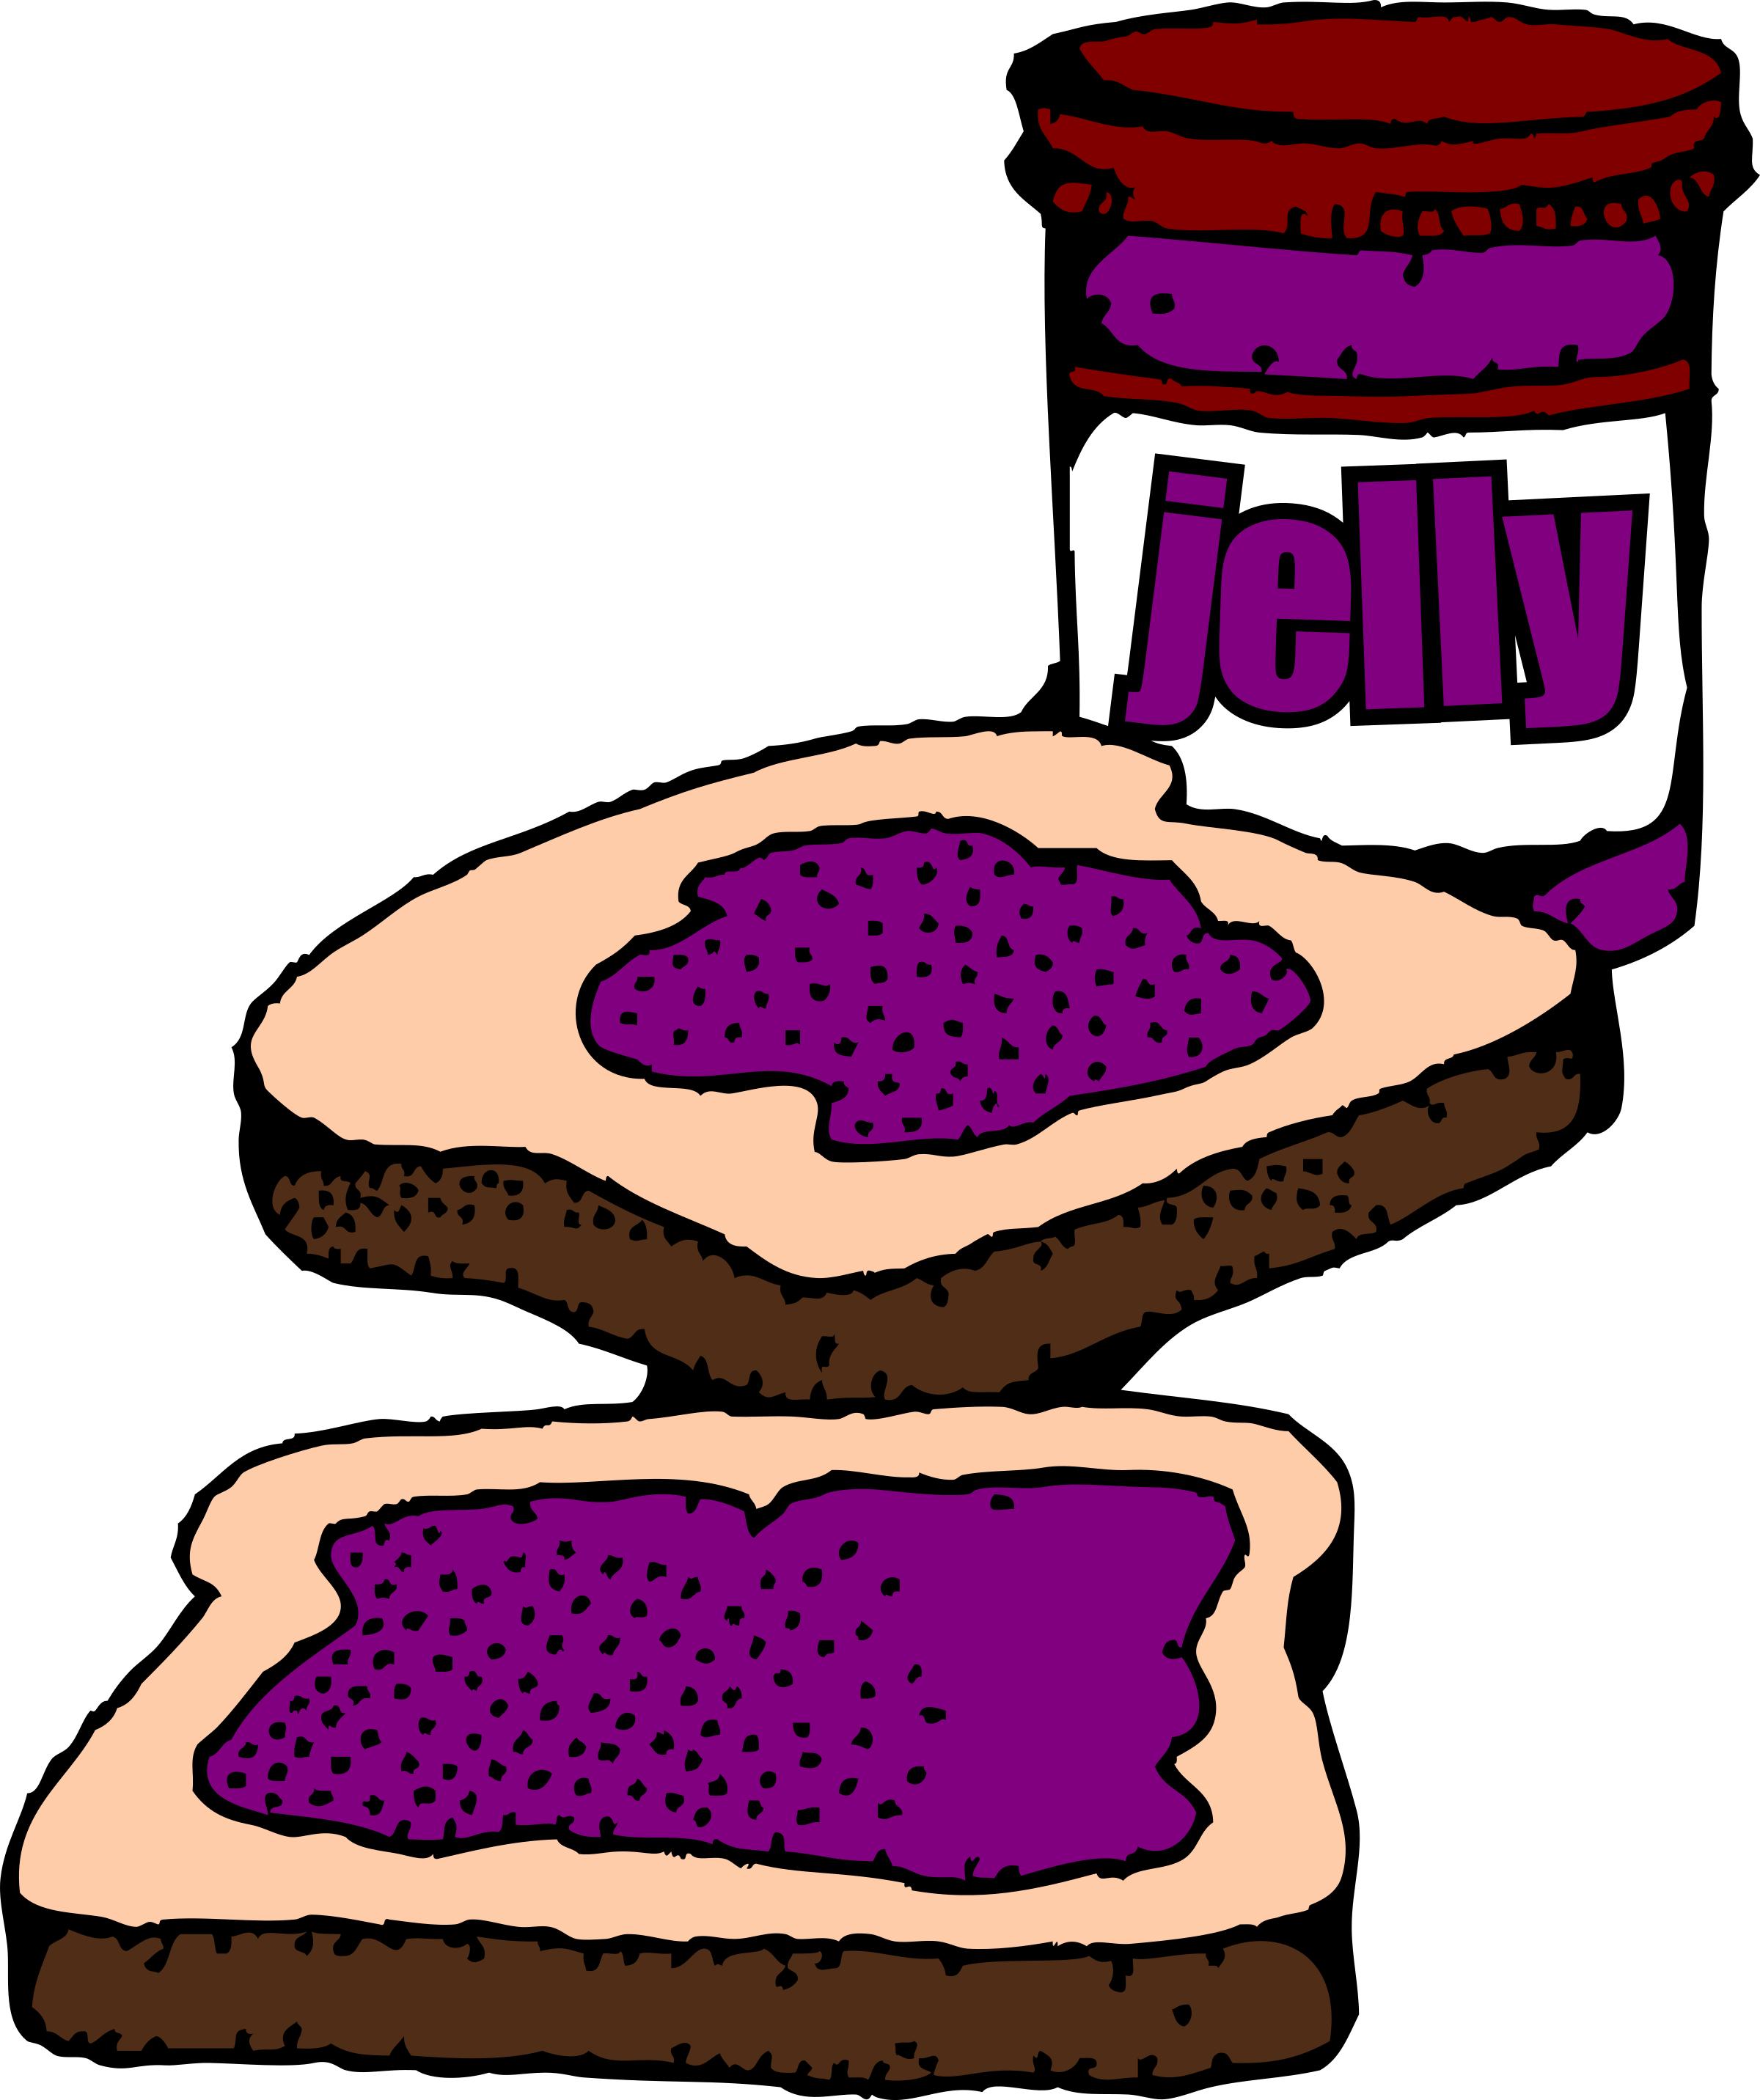 Colorized Peanut butter and jelly sandwich png